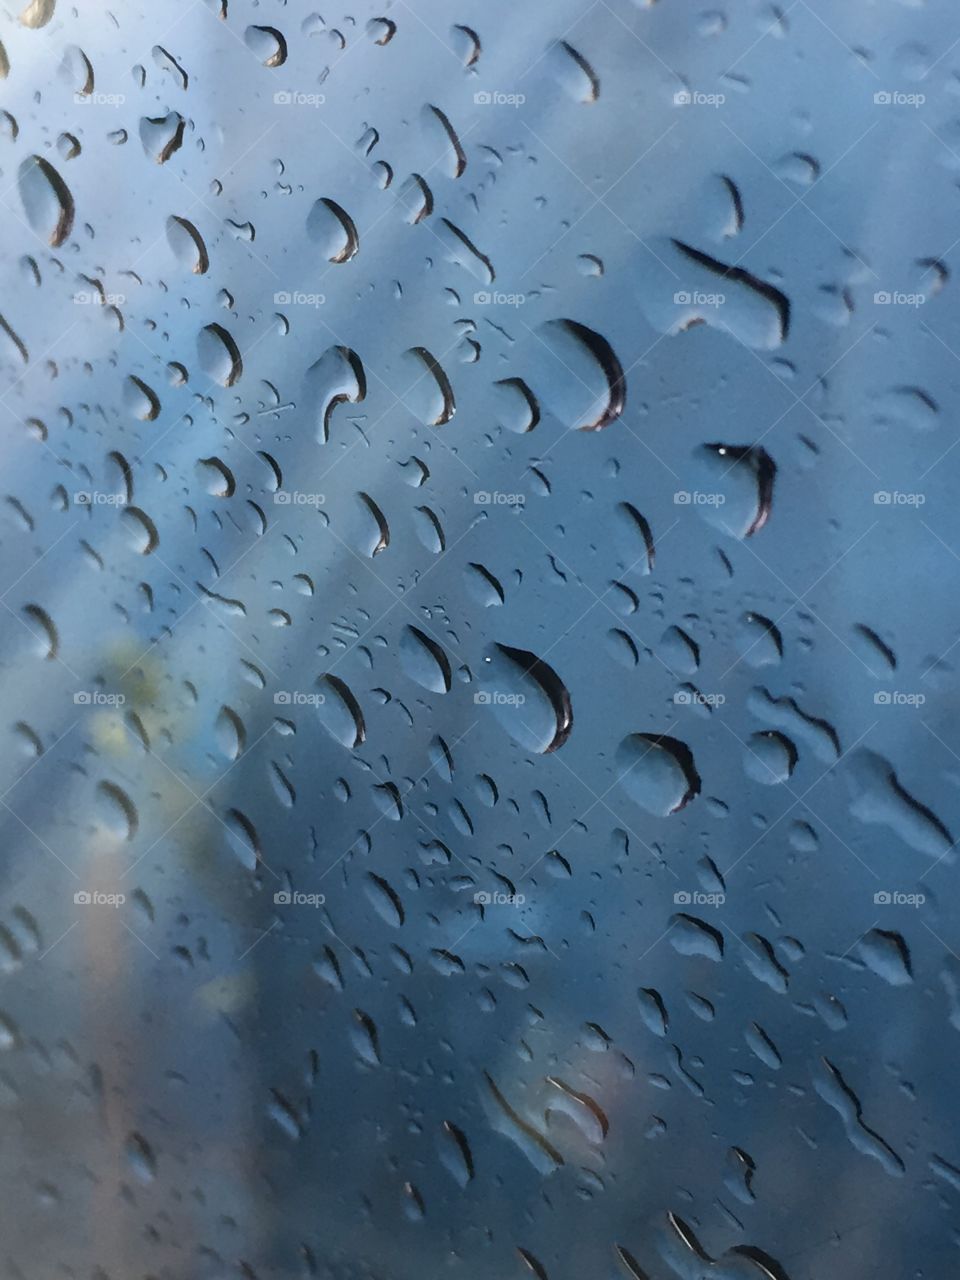 Raindrops - blessings from heaven 